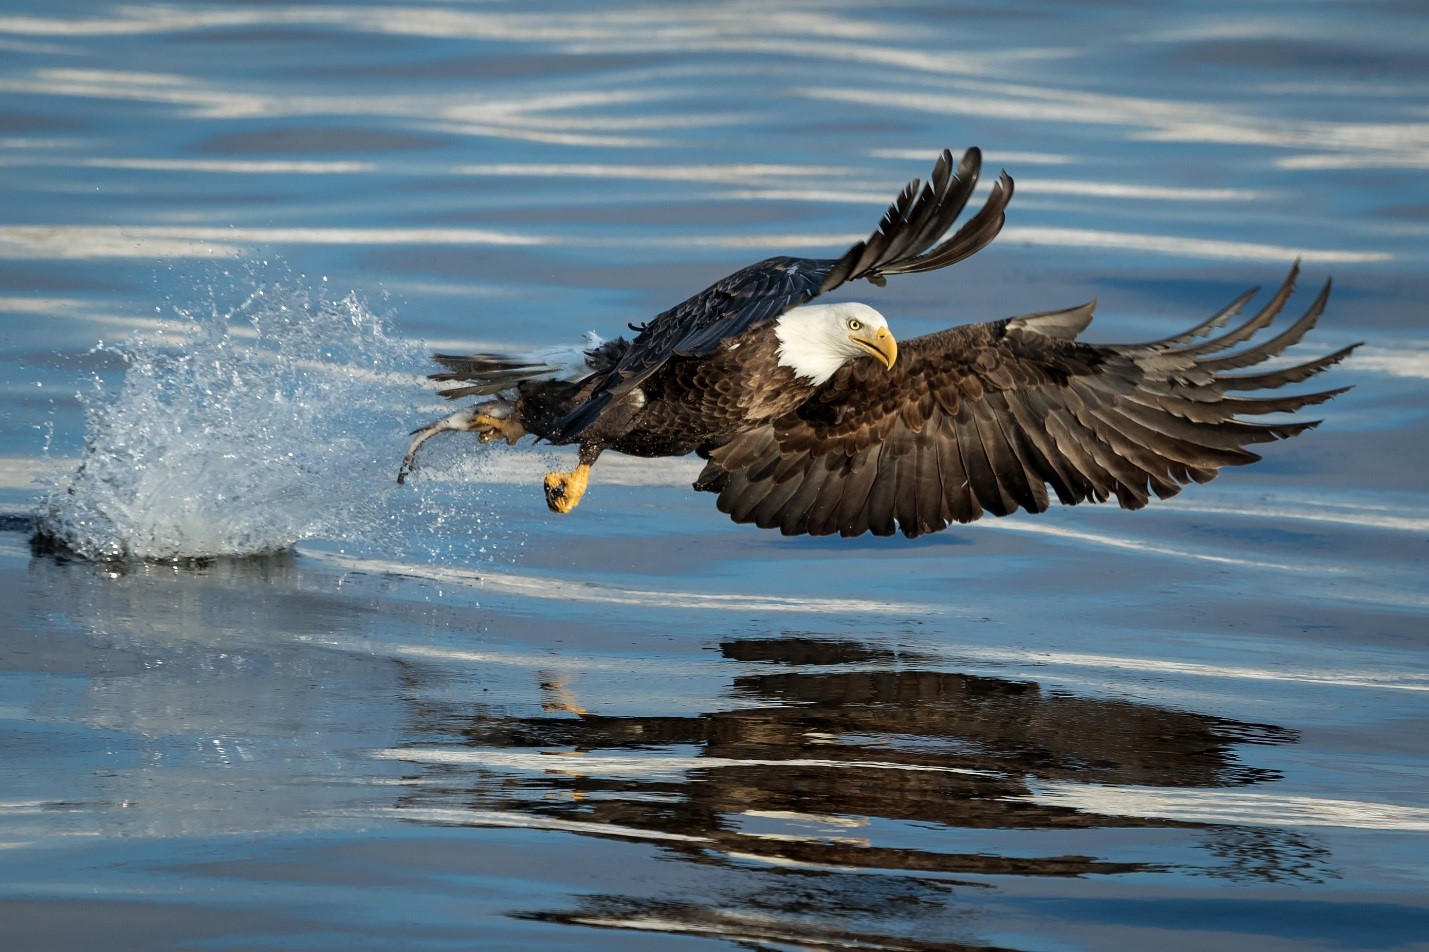 A bald eagle takes off from the water after catching a fish